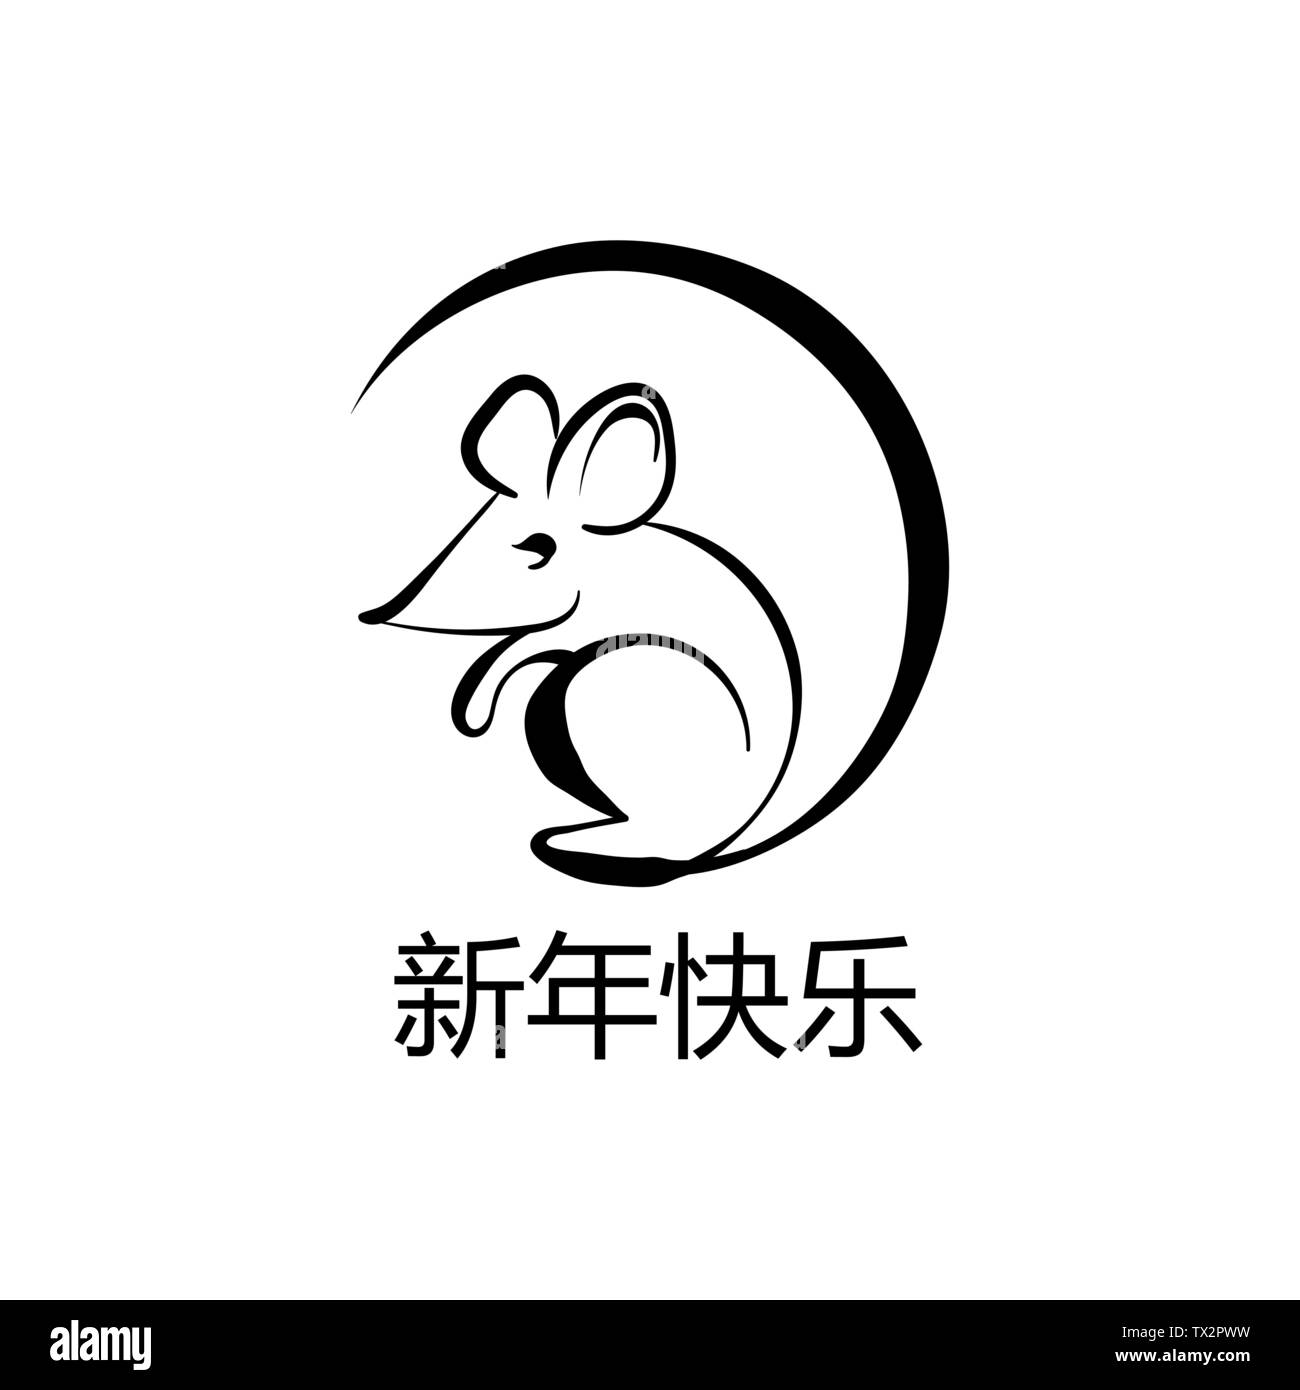 Happy New Year. 2020 new year rat chinese traditional new year. Ink paintbrush silhouette black white. Simple monochrome stroke artwork. Stock Vector